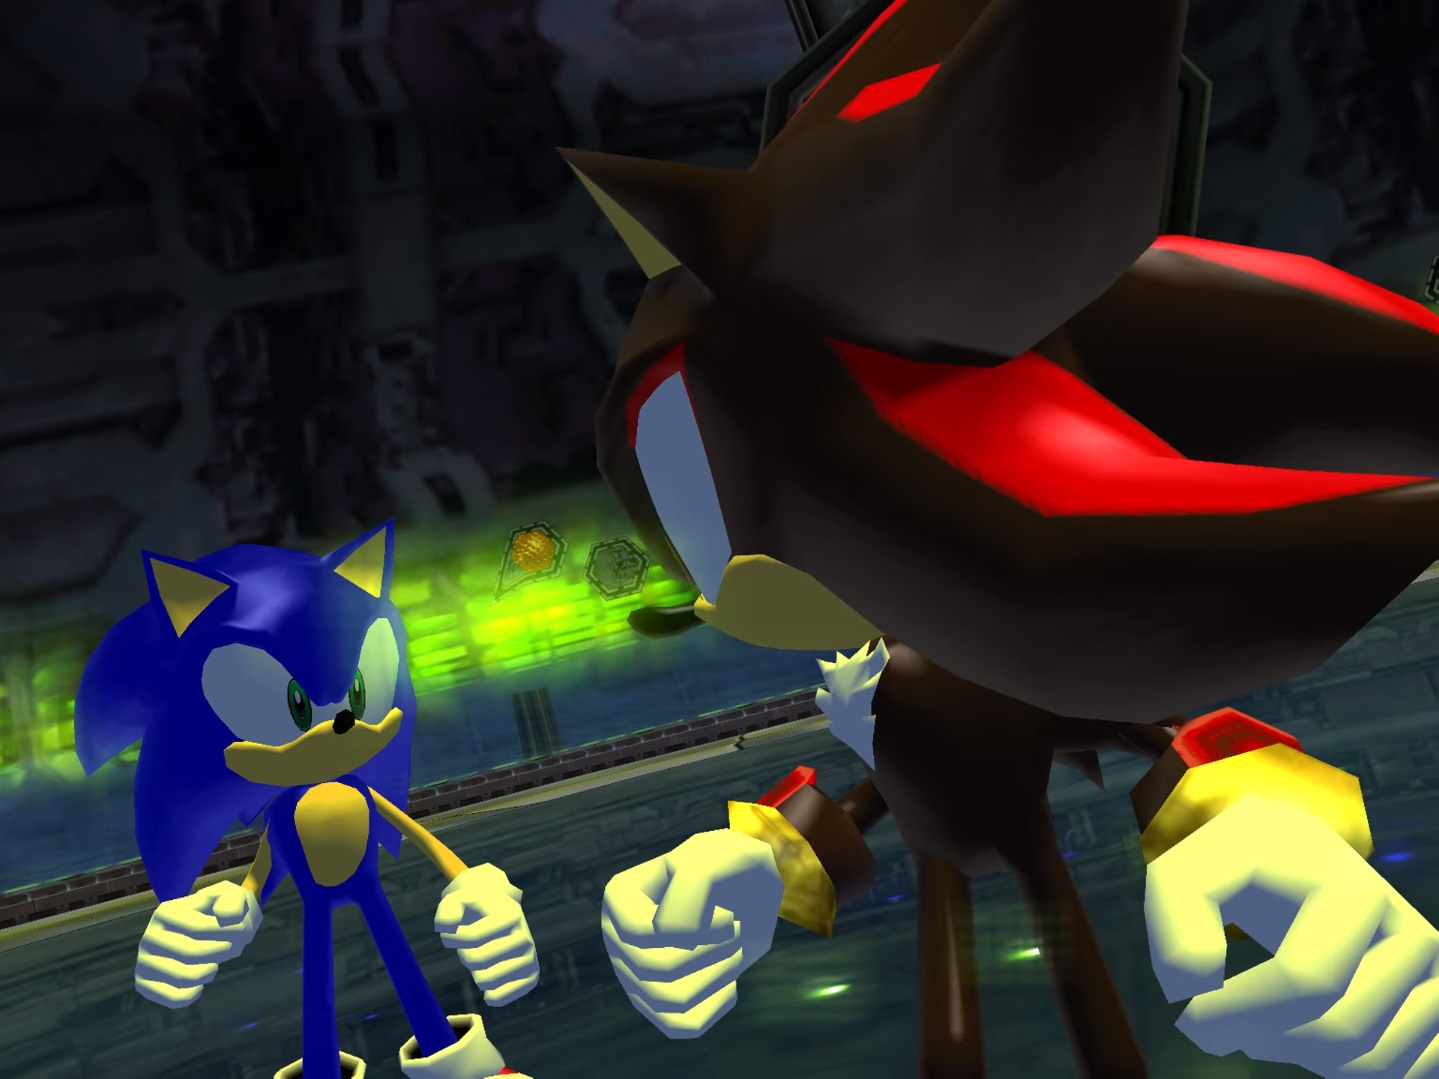 sonic and shadow videos